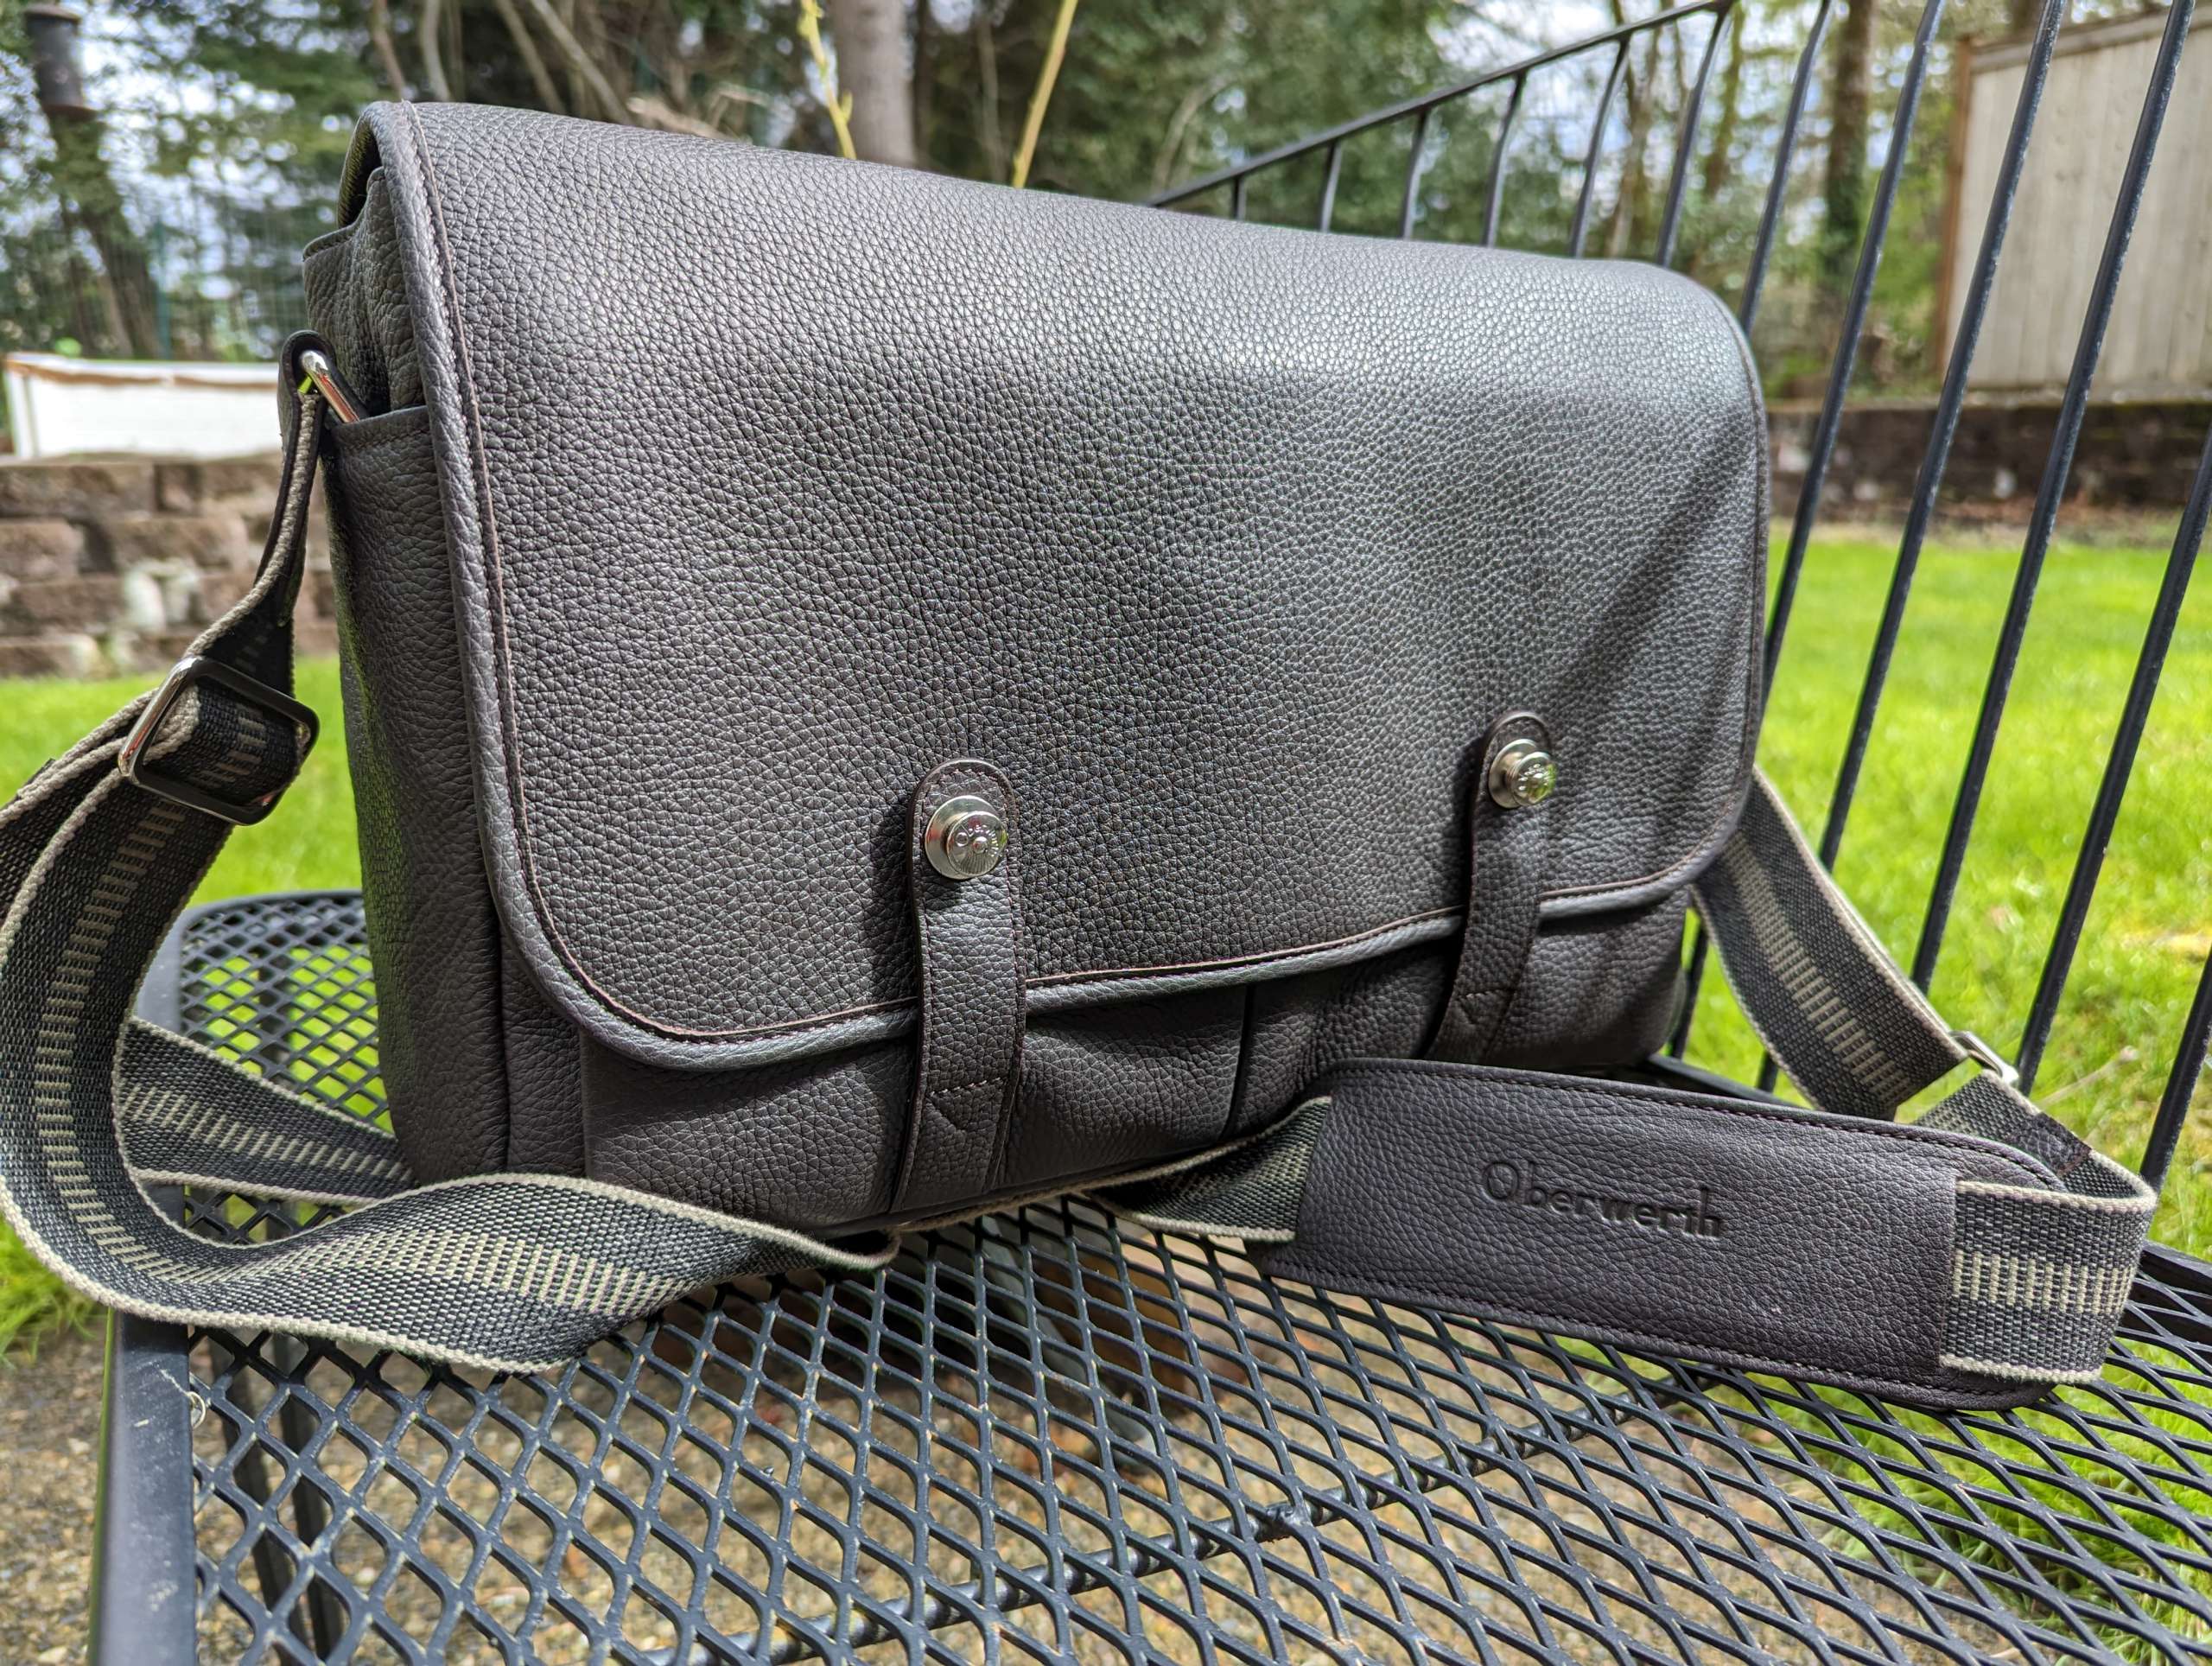 Oberwerth William Camera and Messenger Bag review - a timeless